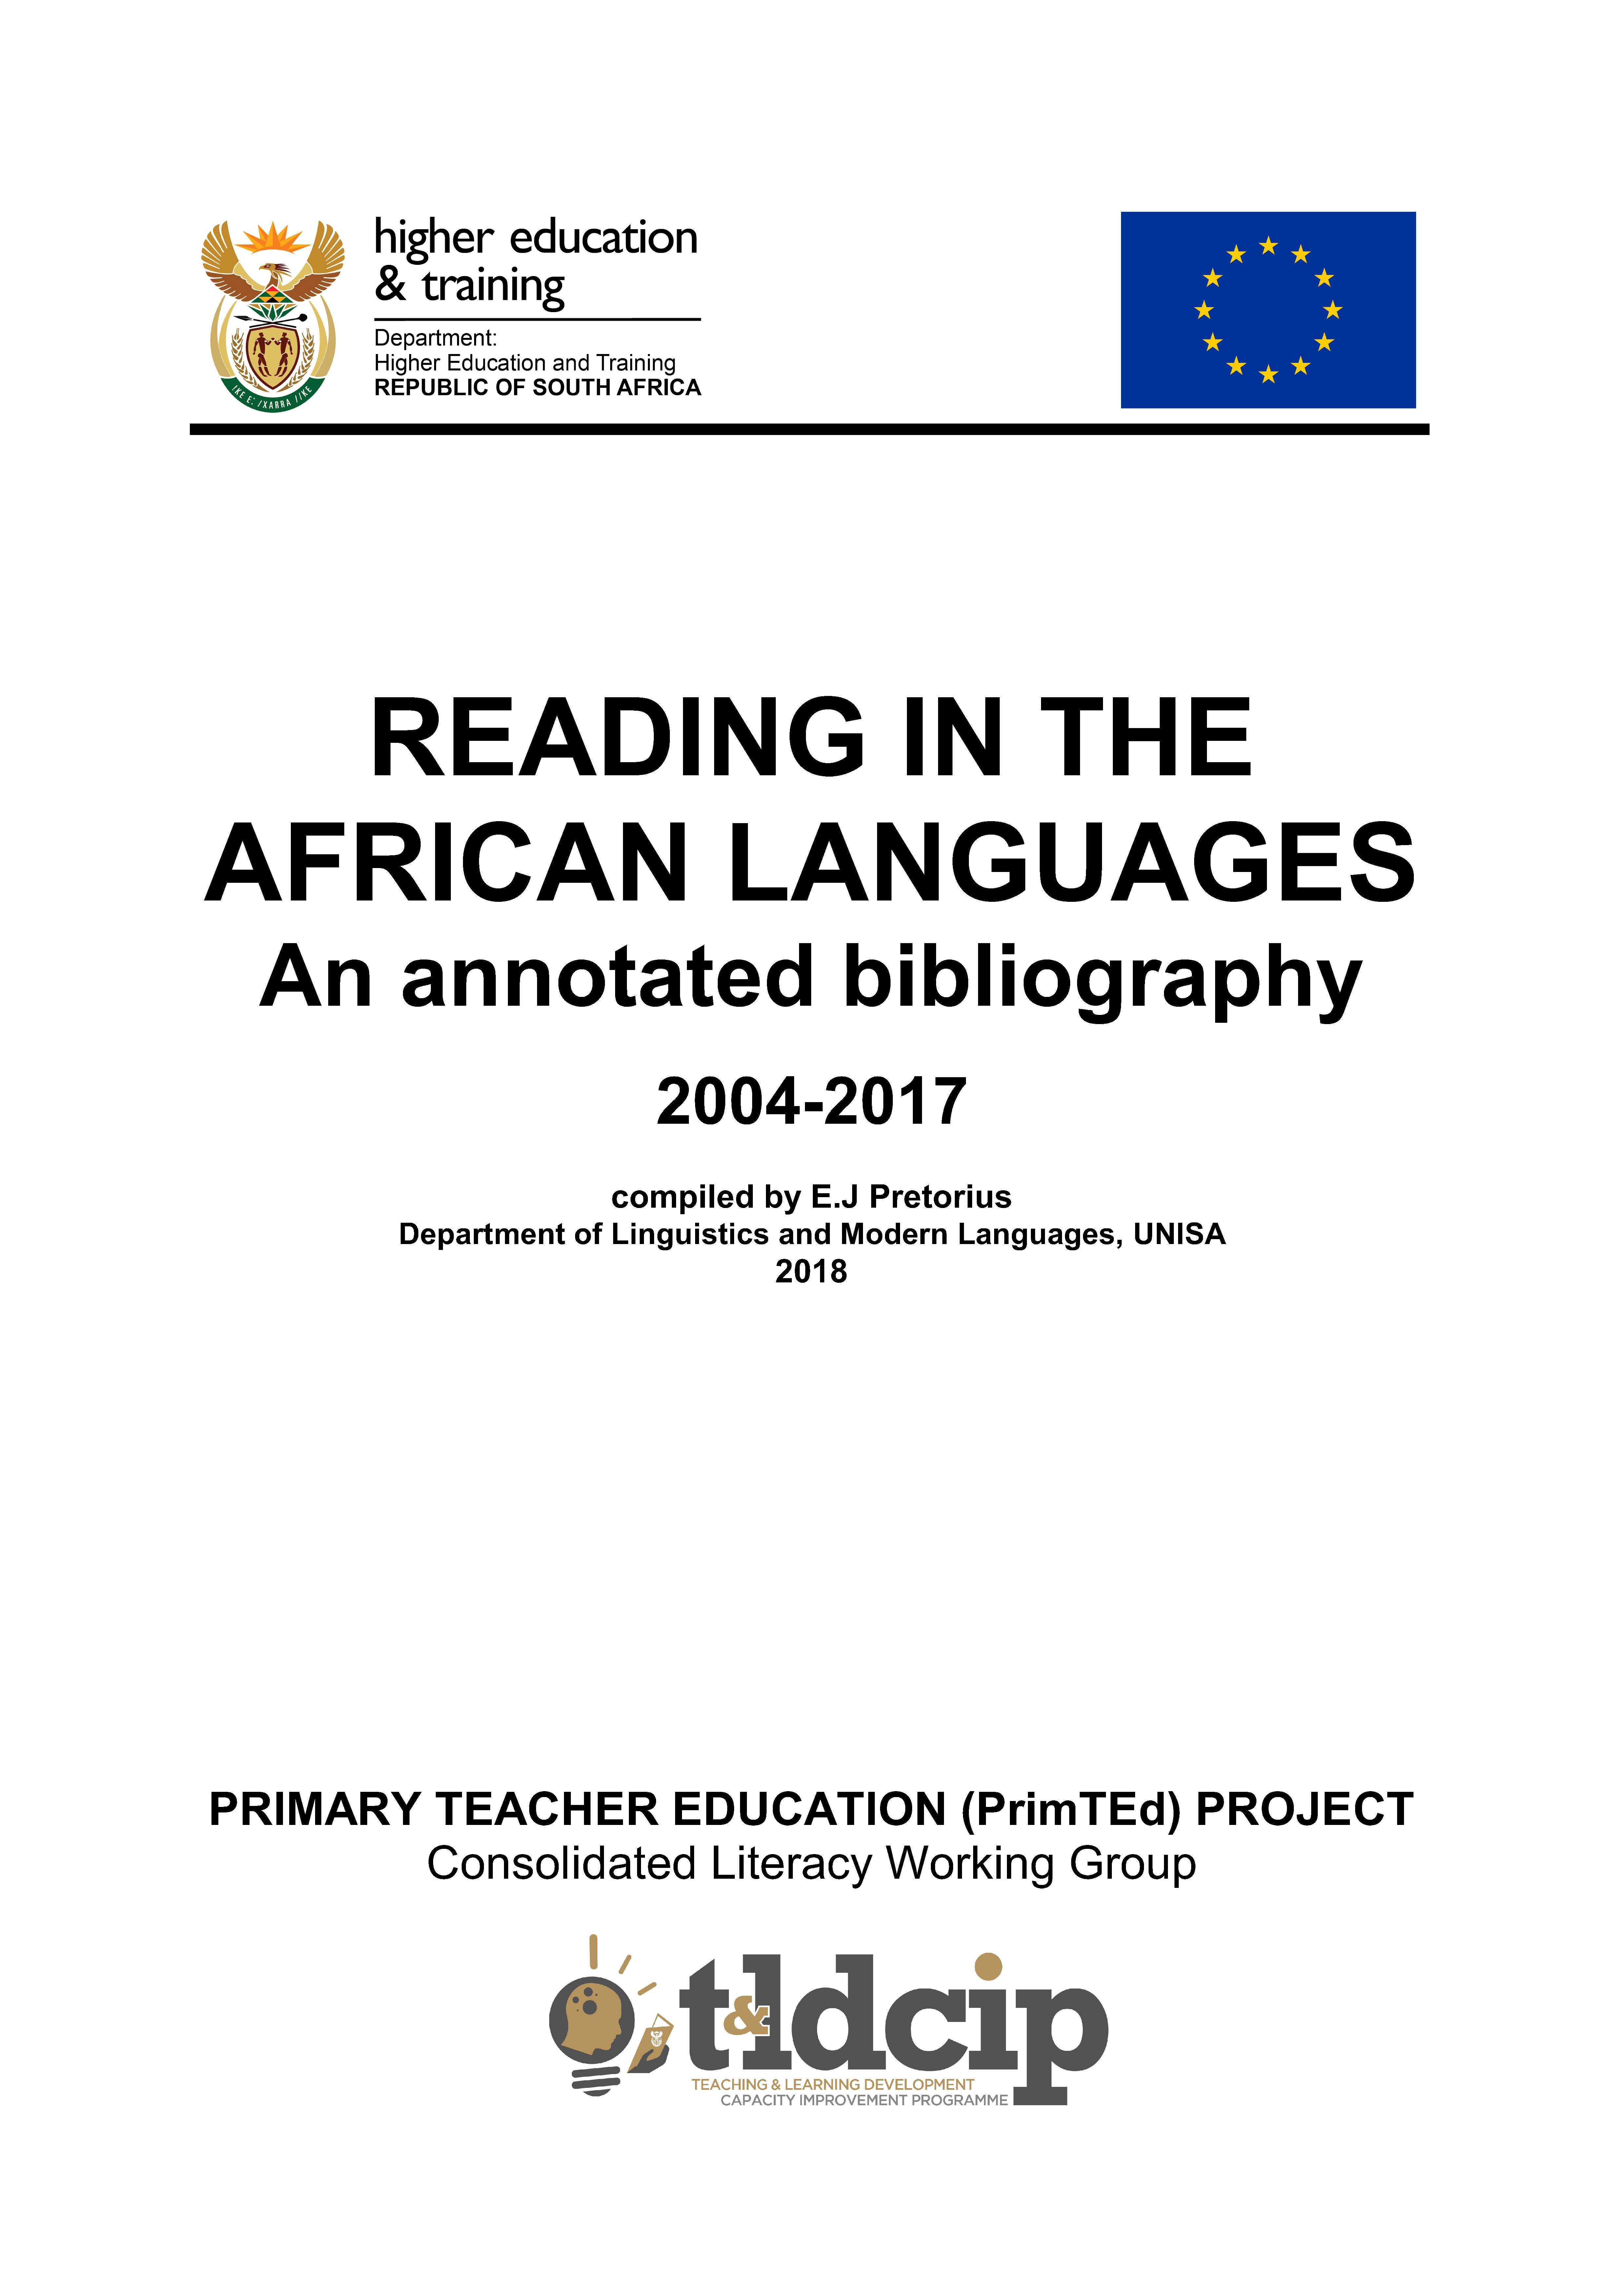 Electronic Bibliography for African Languages and  - Glocalnet